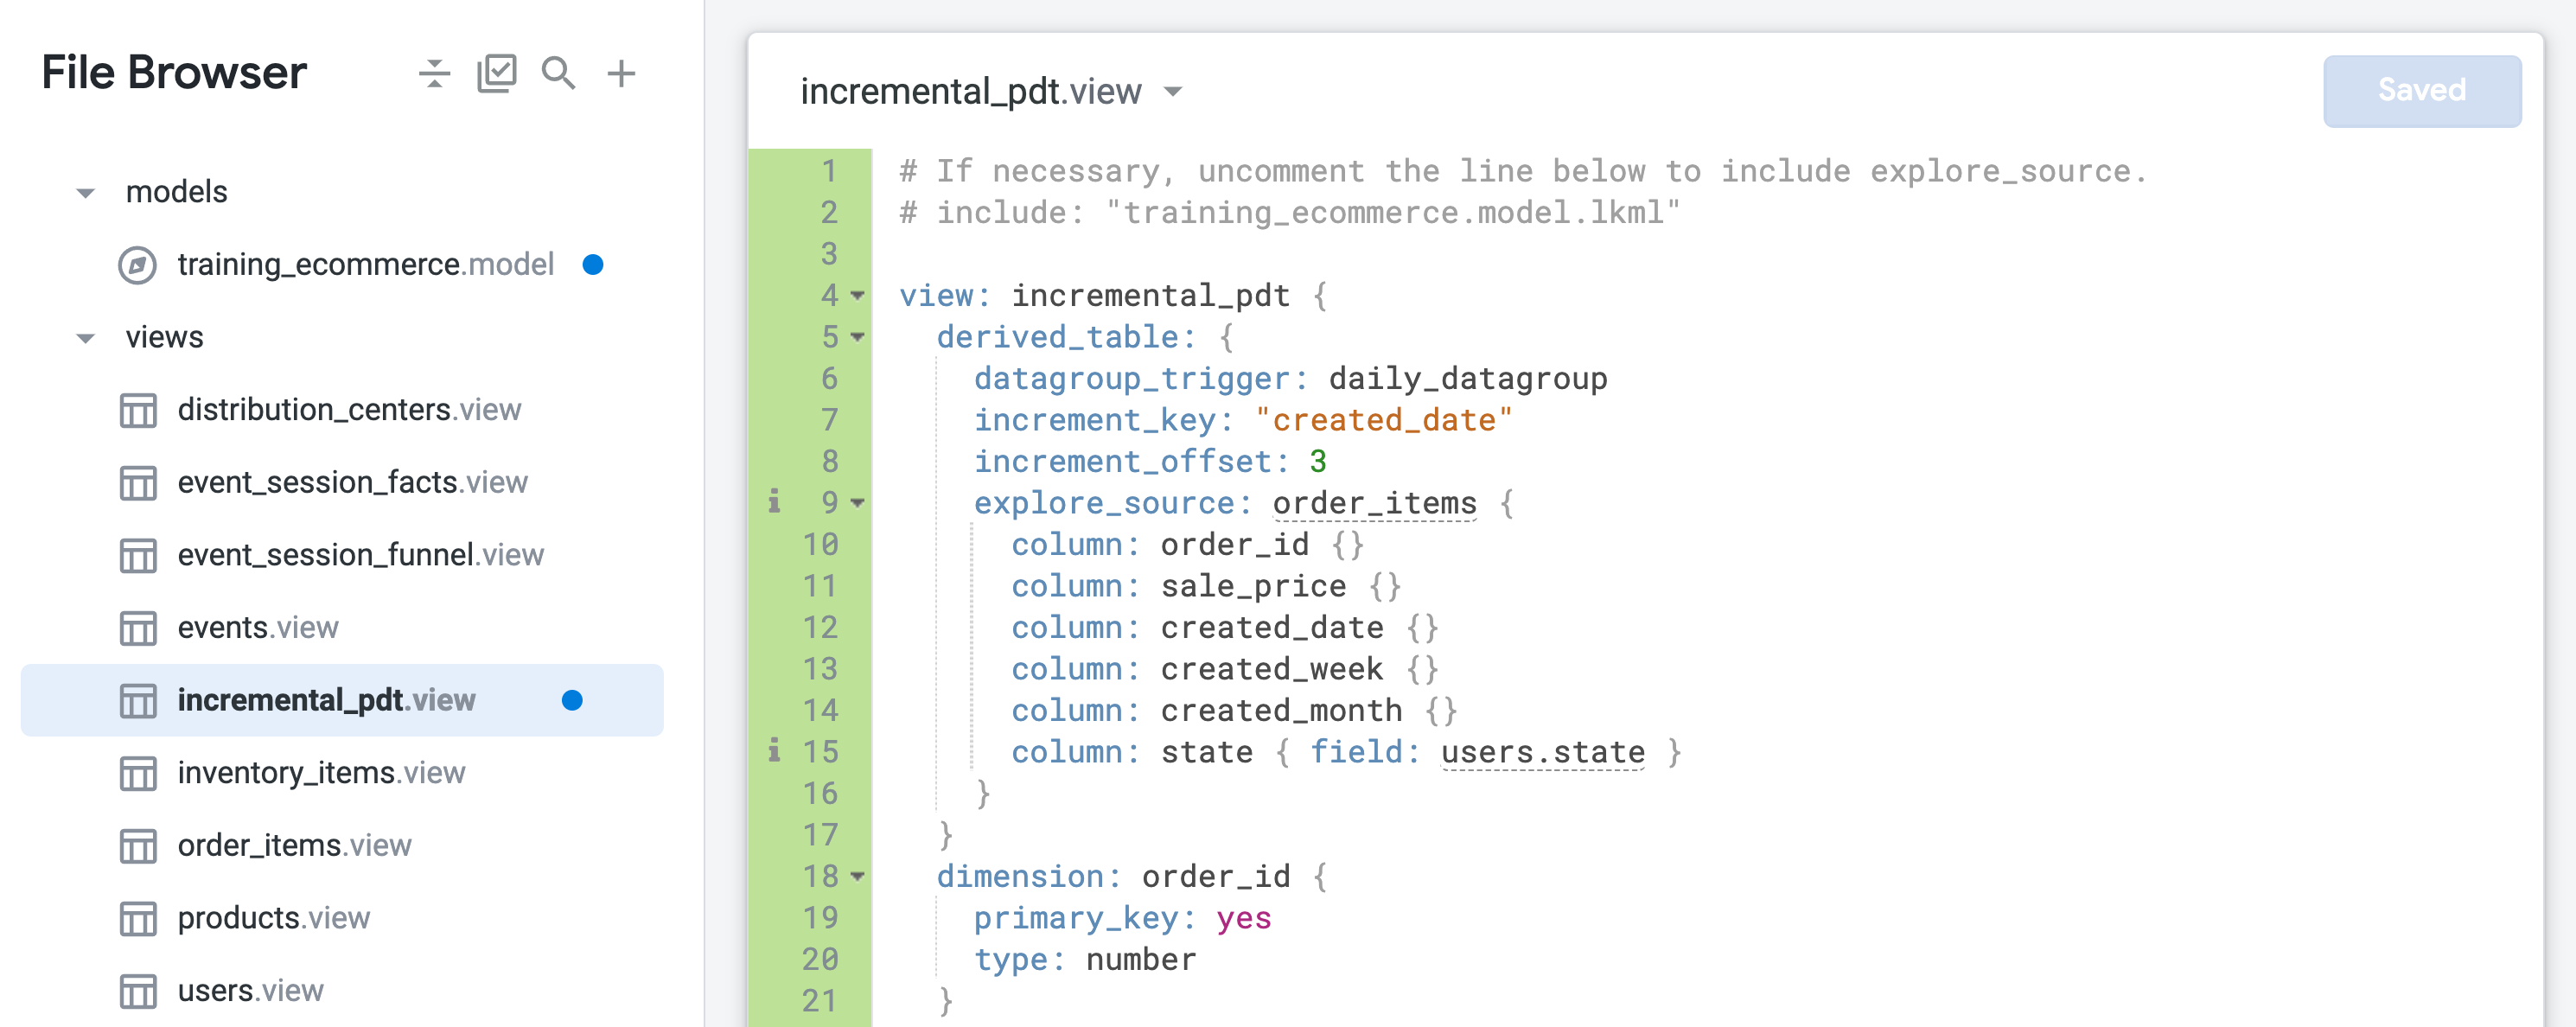 The updated incremental_pdt.view file displaying lines one to 21